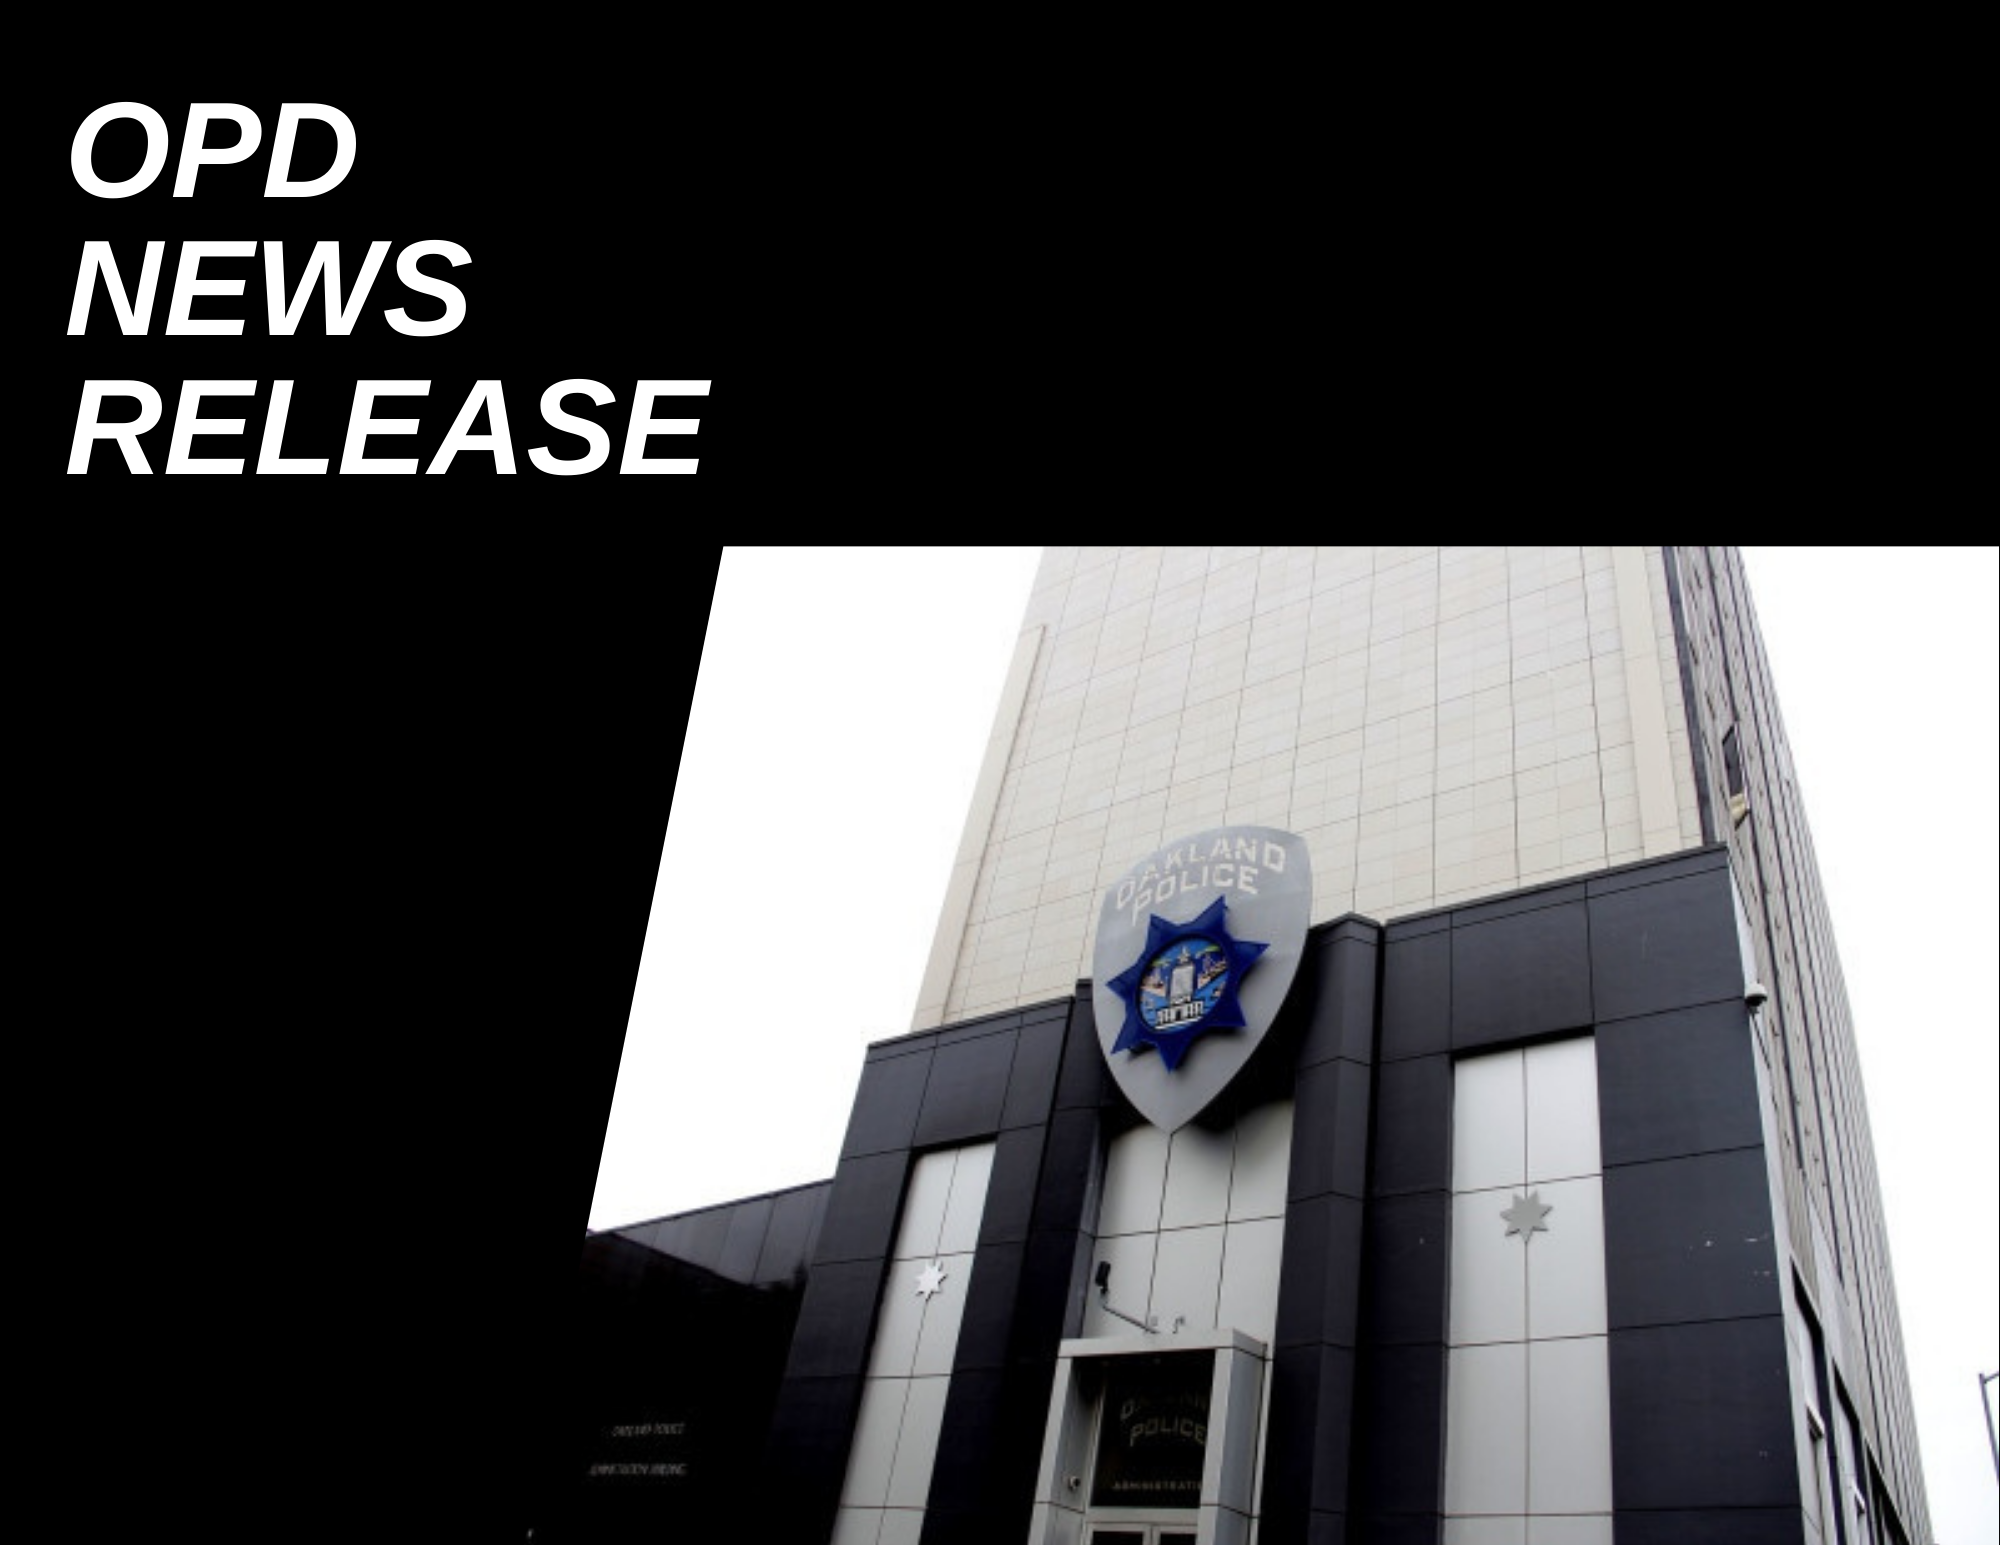 OPD News Release and Oakland Police Headquarters